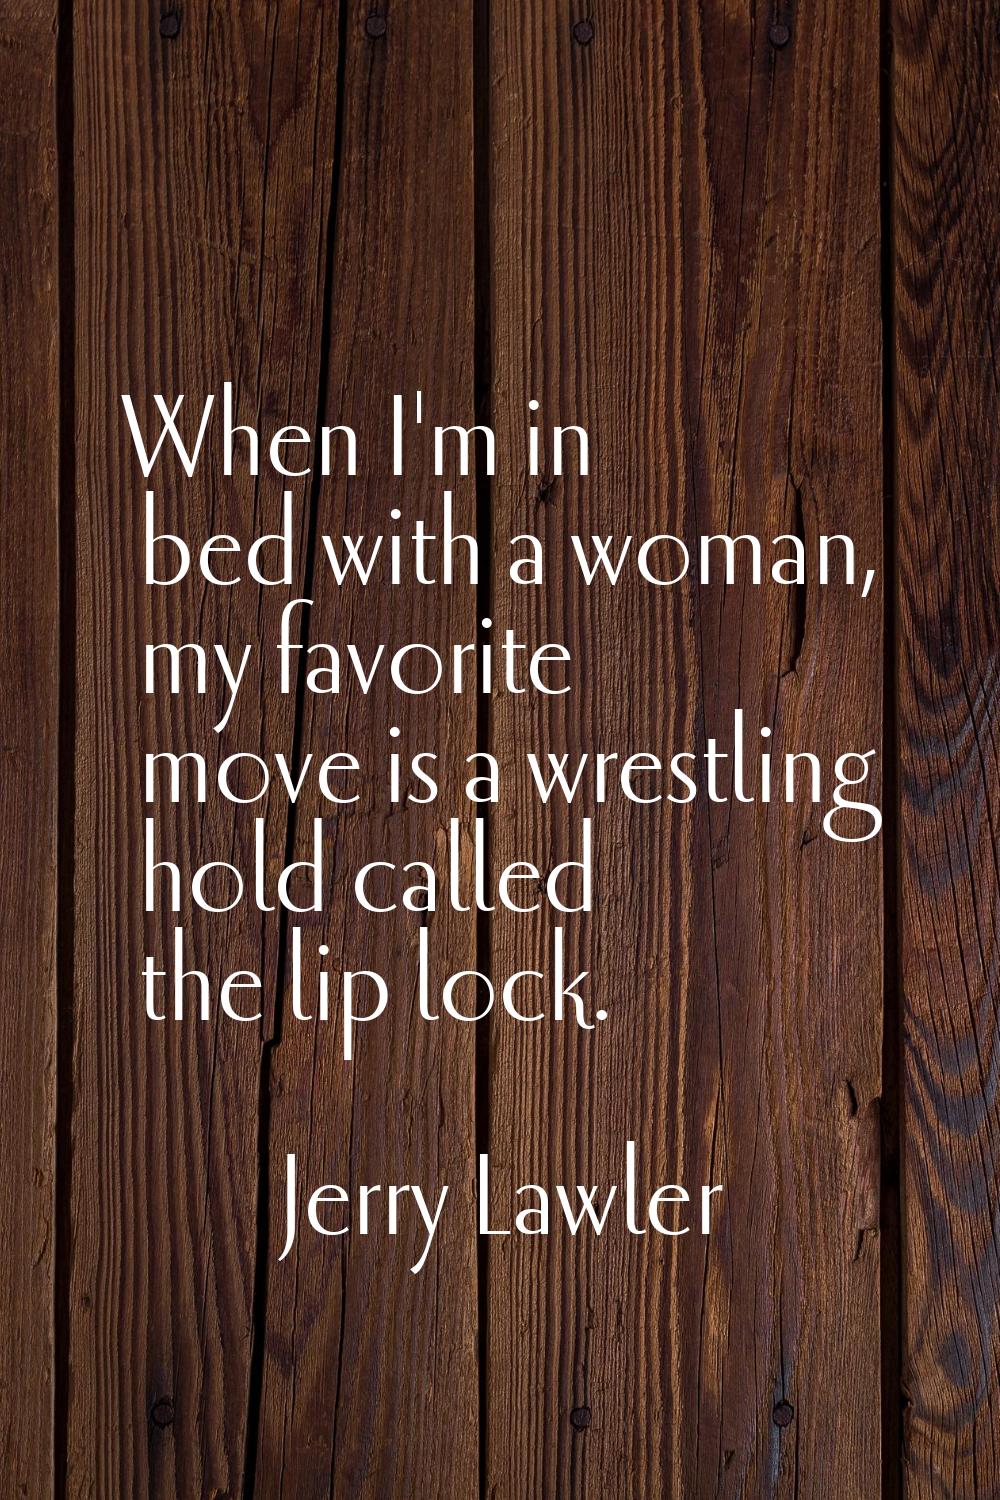 When I'm in bed with a woman, my favorite move is a wrestling hold called the lip lock.